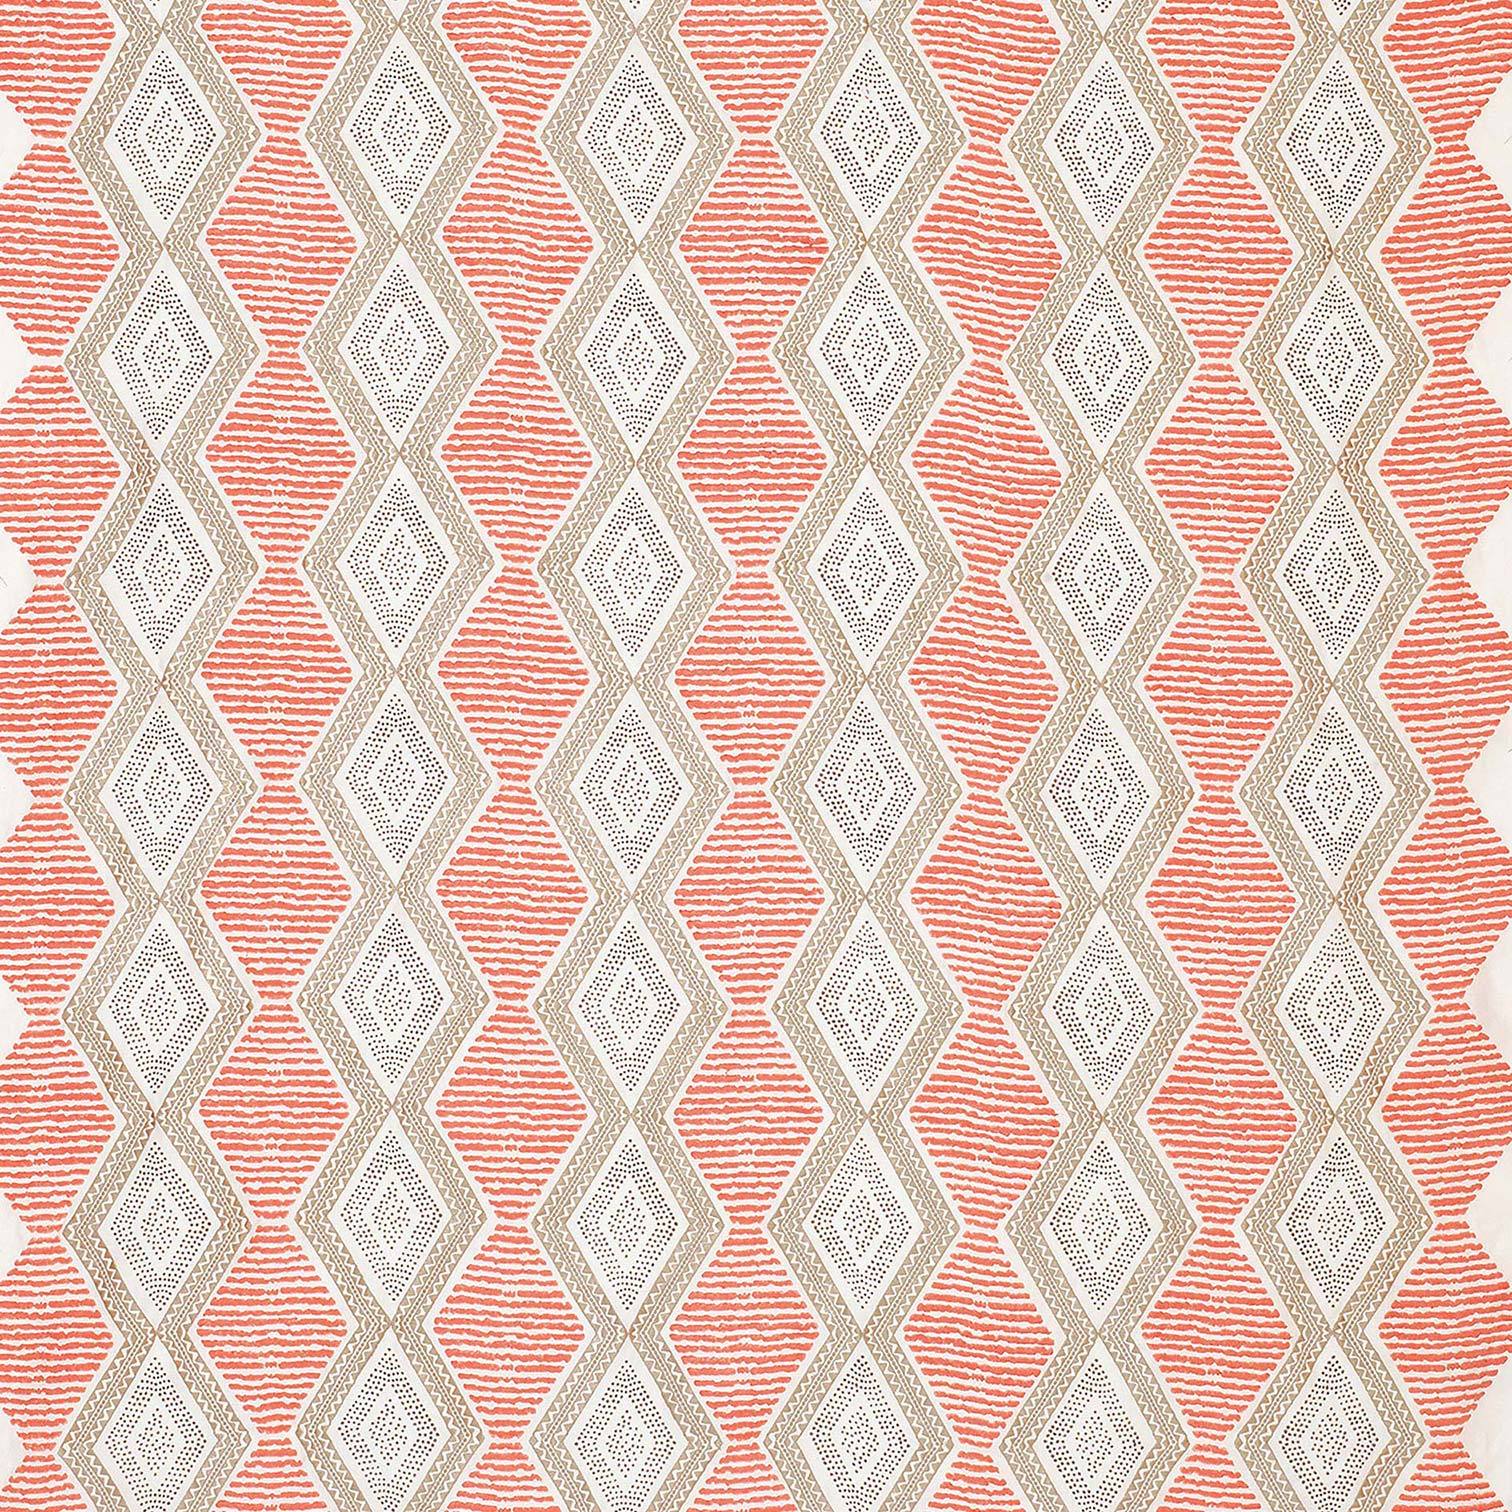 Nina Campbell Fabric - Les Rêves Belle Île Coral/Beige/Choc NCF4291-01